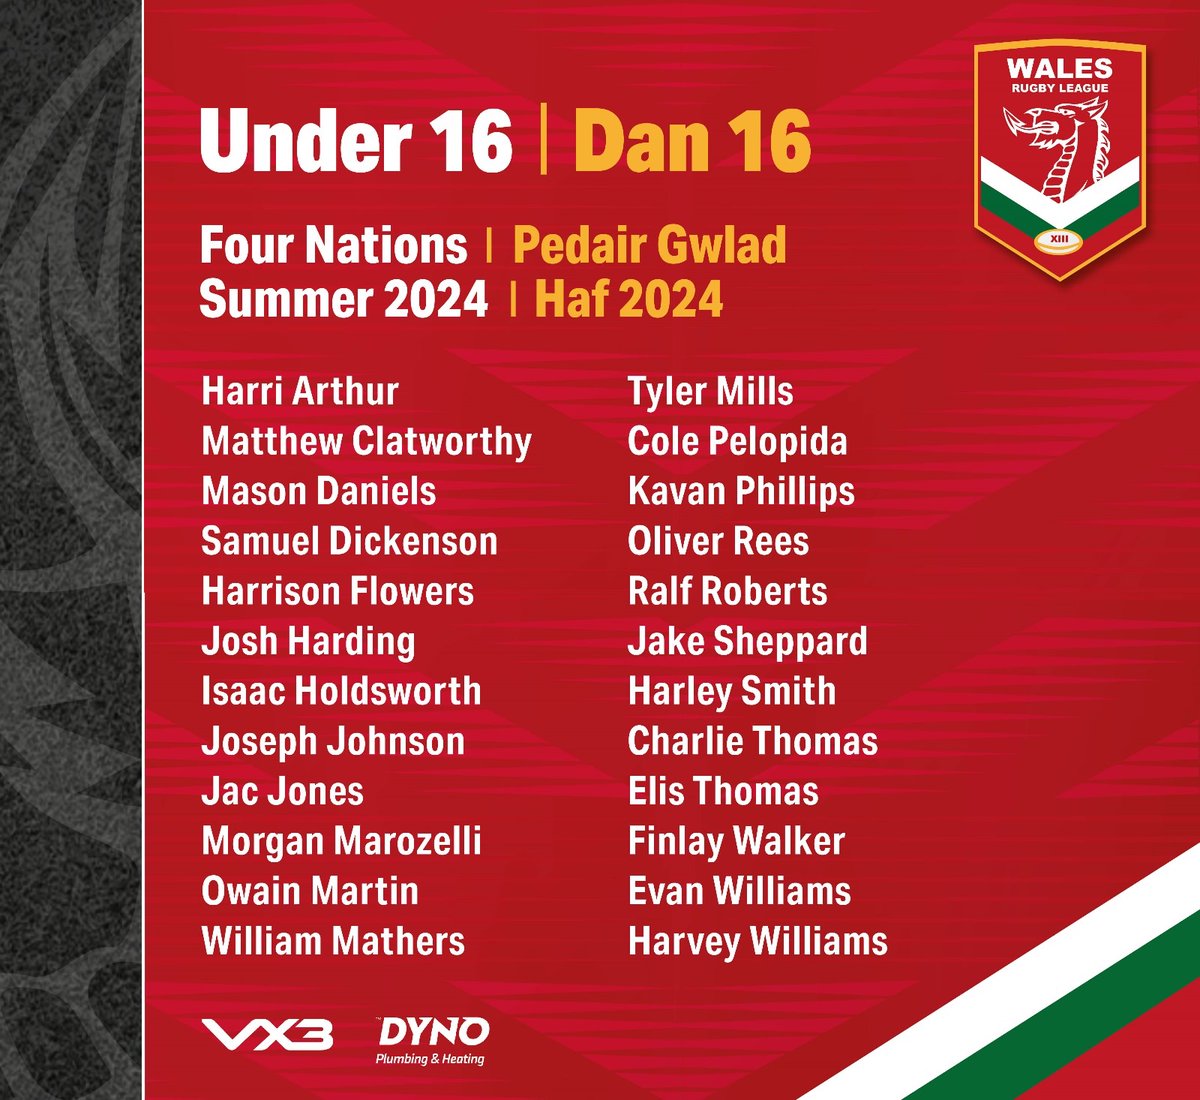 Big club congratulations to our very own Jac Jones, in his selection for the u16’s @WalesRugbyL best of luck from club, to you and your team mates. Go well lads 🏴󠁧󠁢󠁷󠁬󠁳󠁿